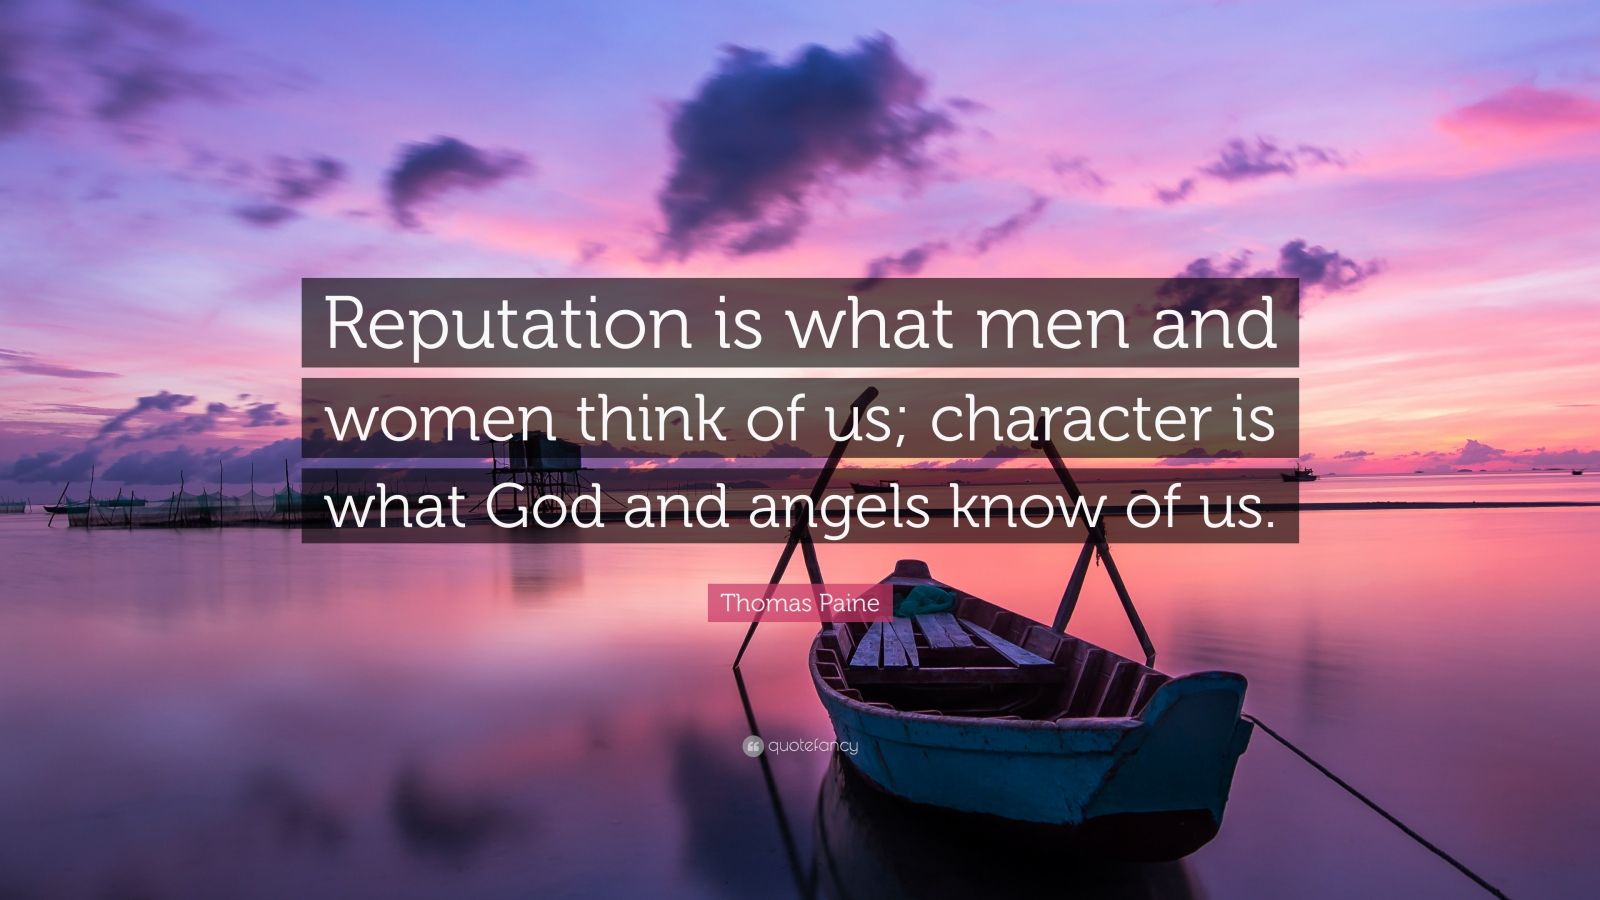 Thomas Paine Quote: “Reputation is what men and women think of us; character is what ...1600 x 900